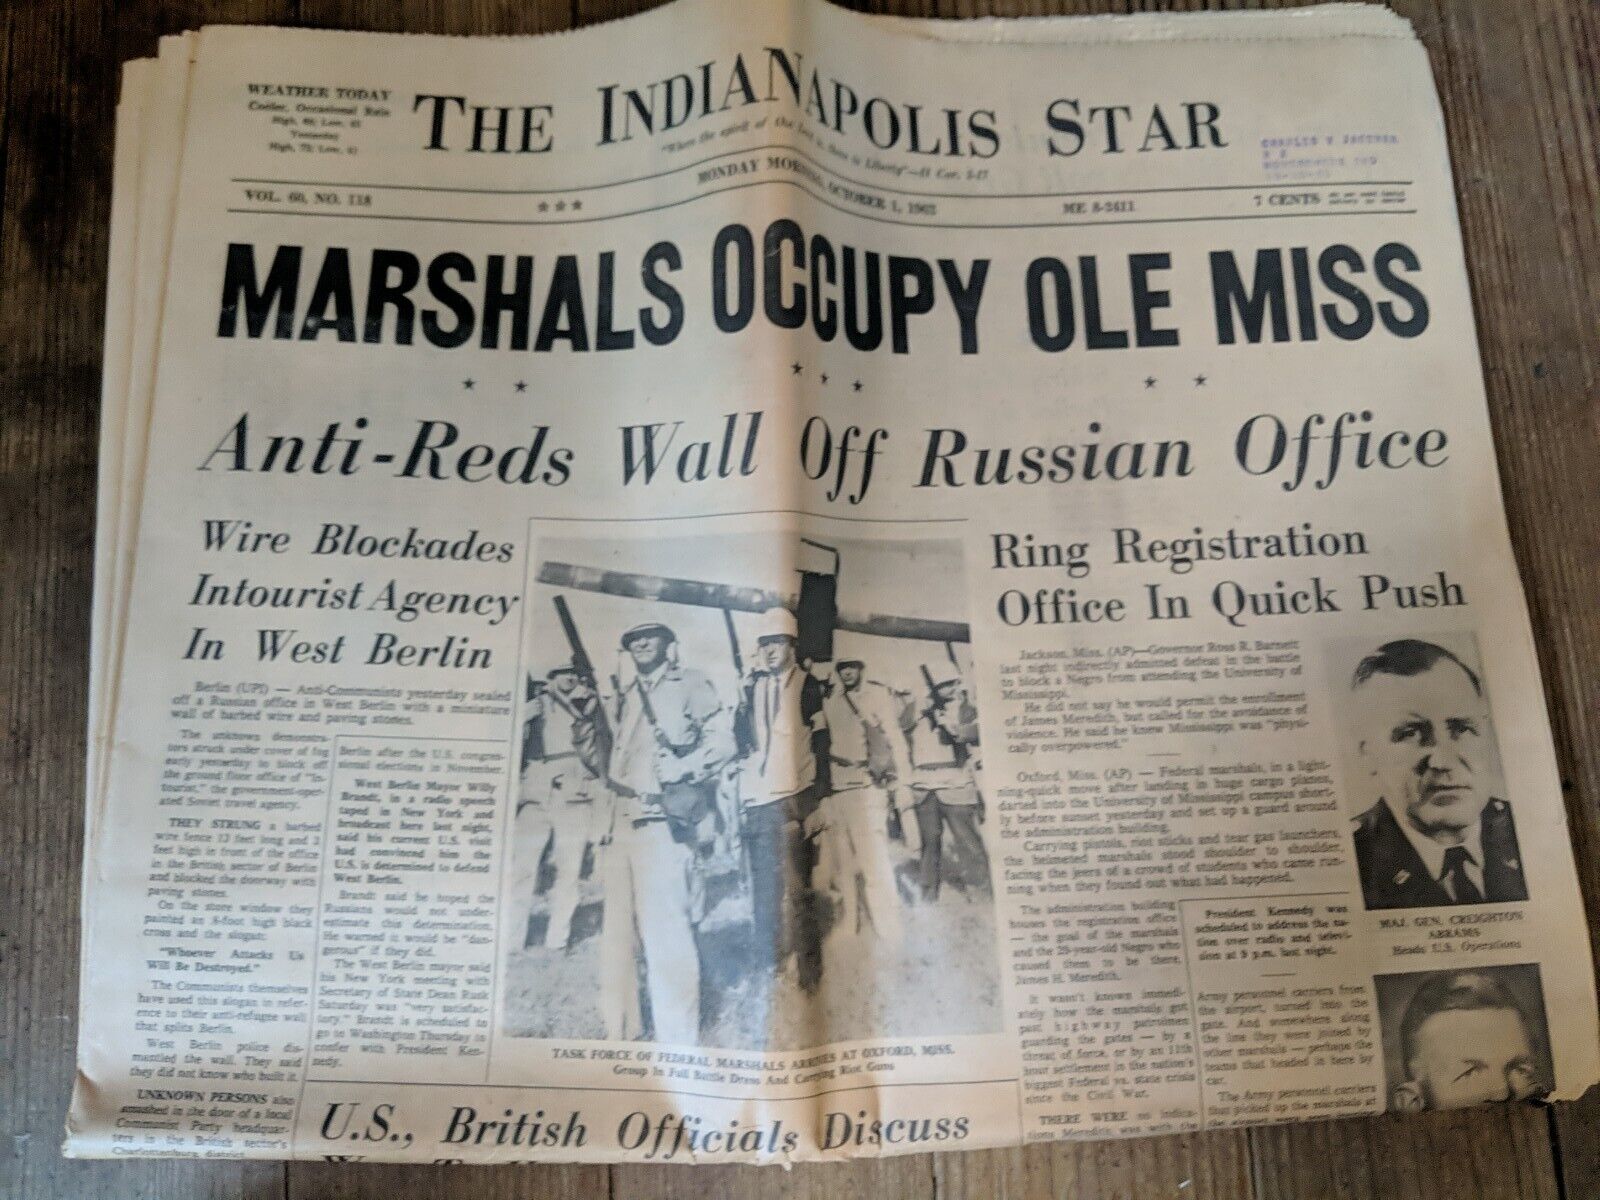 THE INDIANAPOLIS STAR MONDAY MORNING OCTOBER 1962 CIVIL RIGHT INTEGRATION 